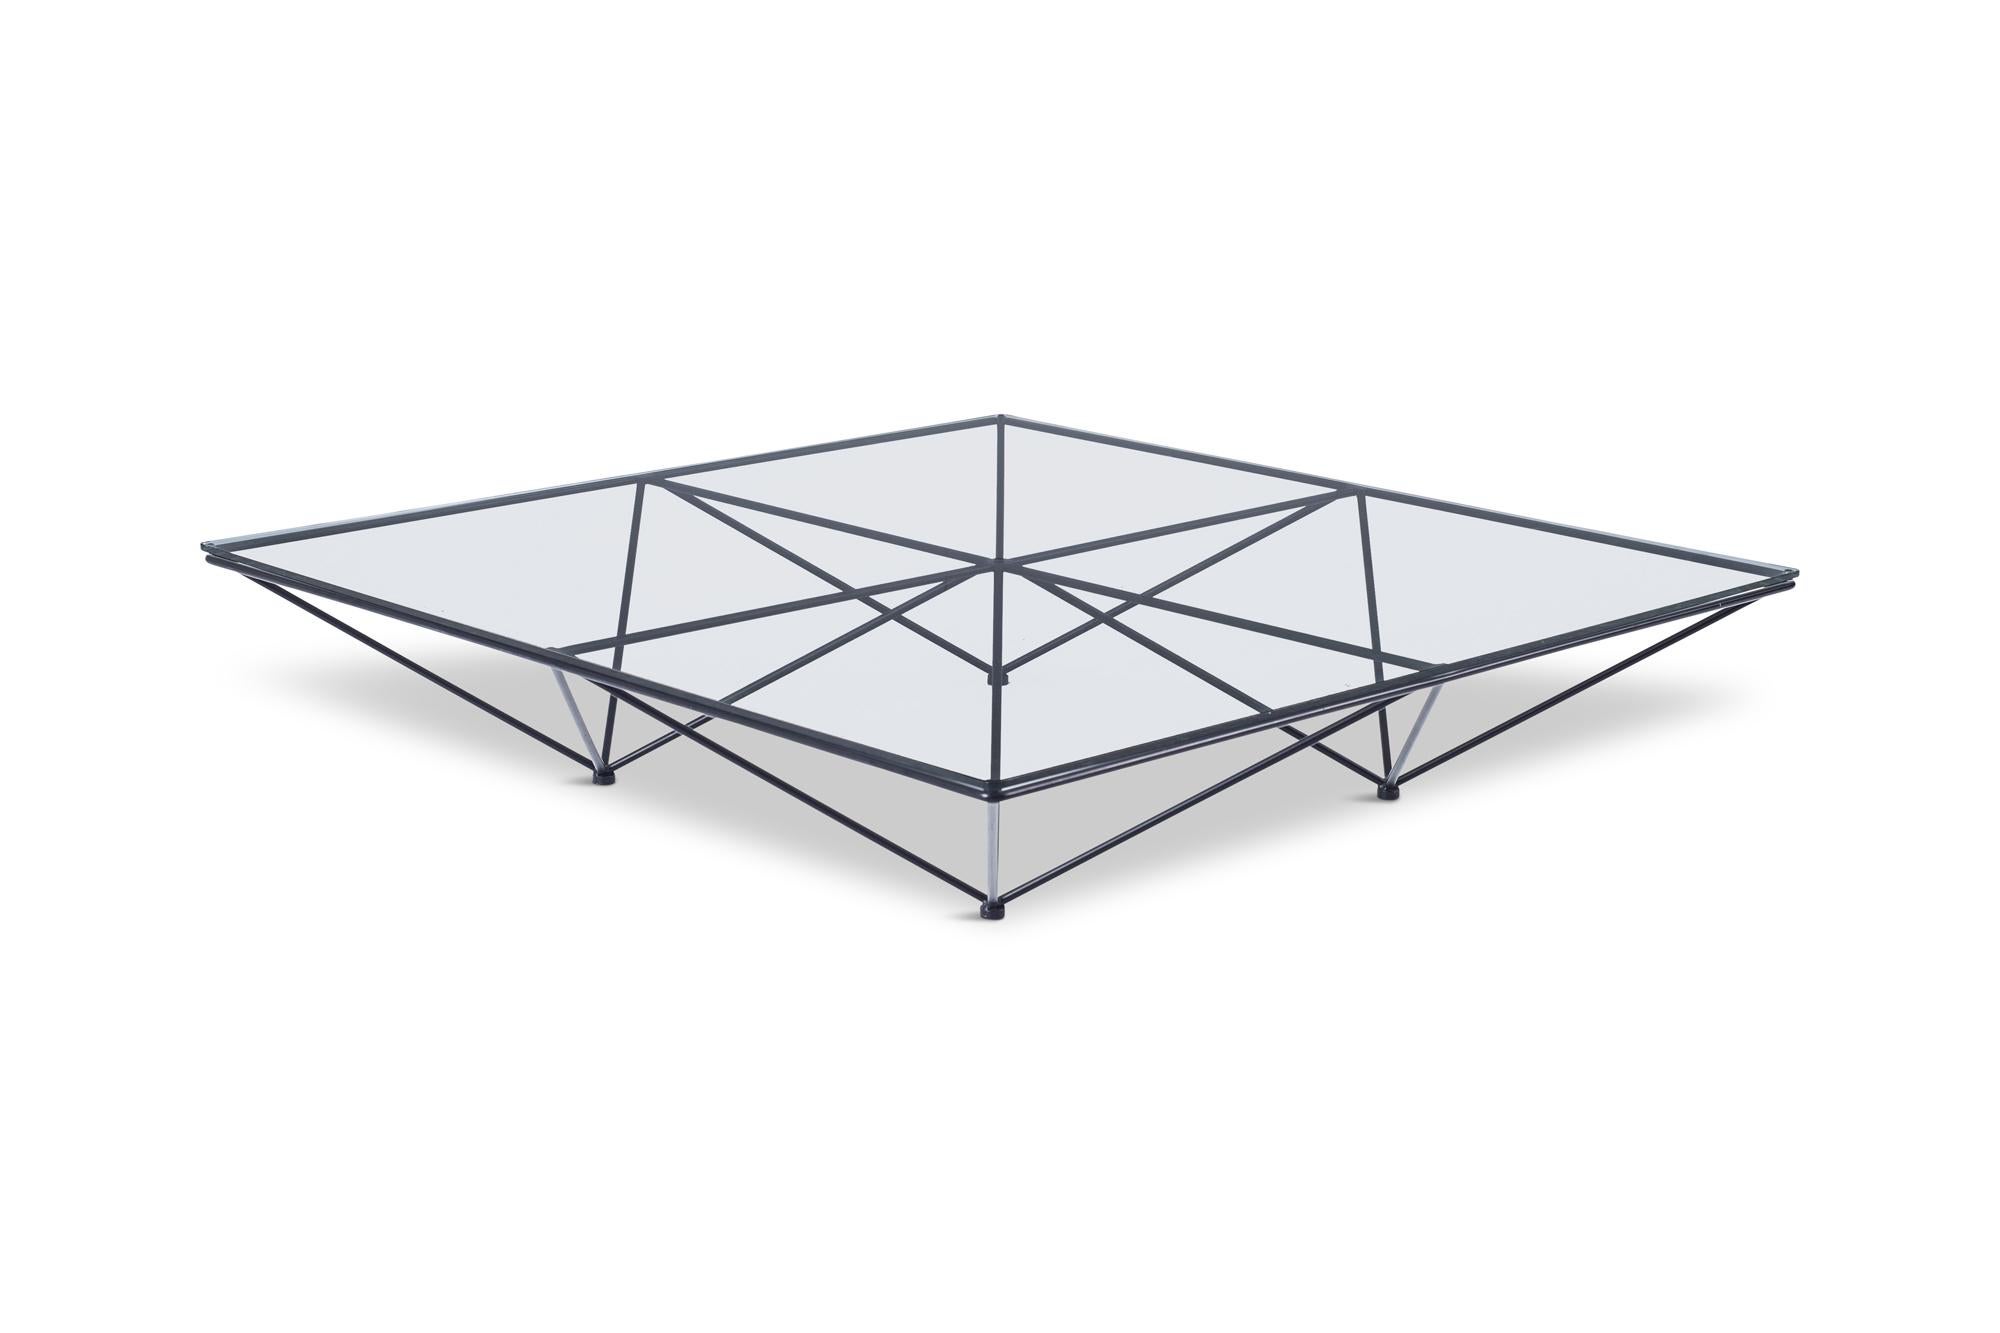 Paolo Piva original Alanda coffee table, an iconic piece that ushered in the 1980s, for B&B Italia .The Alanda’s structure, serving as both pedestal and support, recalls a group of upturned pyramids, a geodetic frame that has always characterized it